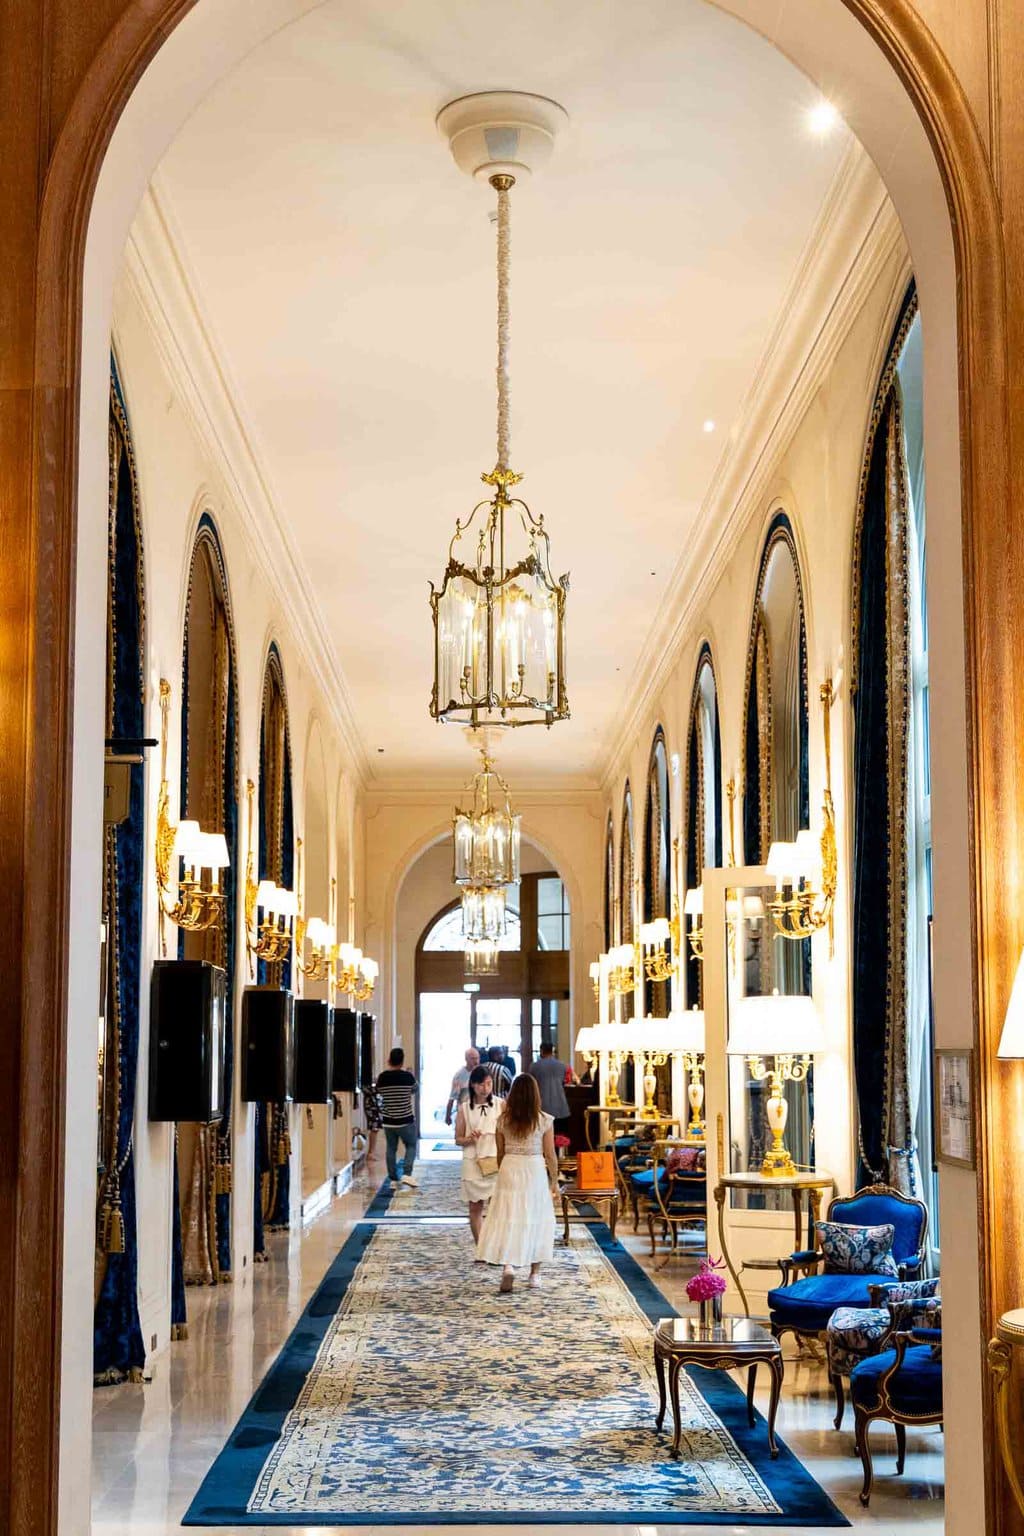 Vertical photo of the interior of the Ritz Hotel in Paris, France.